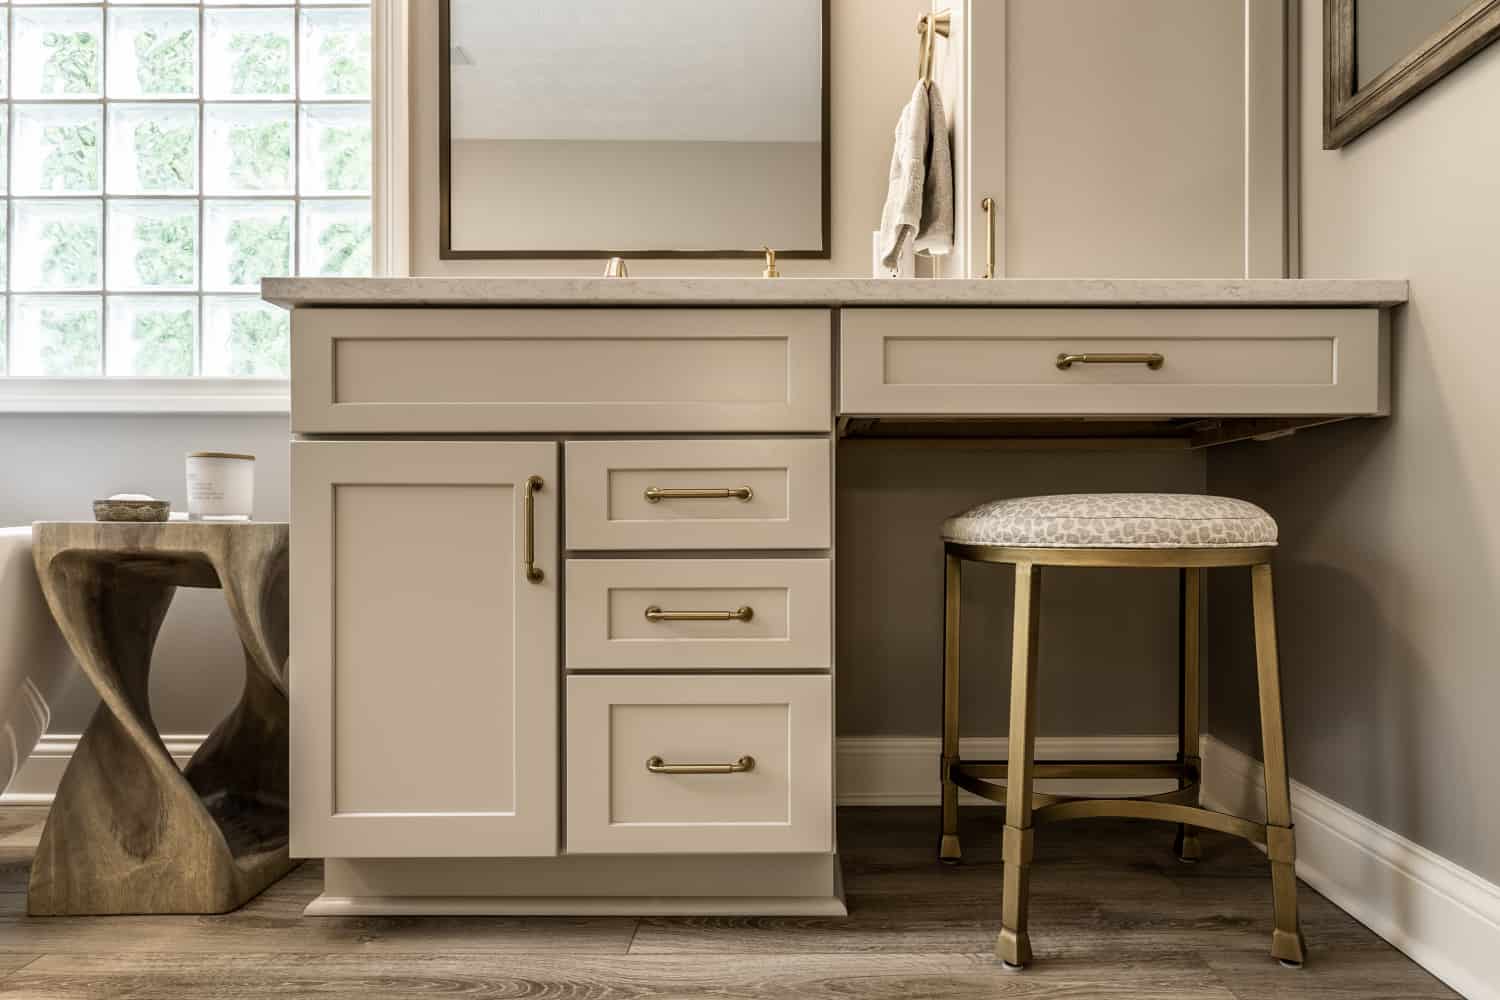 Nicholas Design Build | A modern bathroom with a stylish vanity and a sleek brushed gold stool.